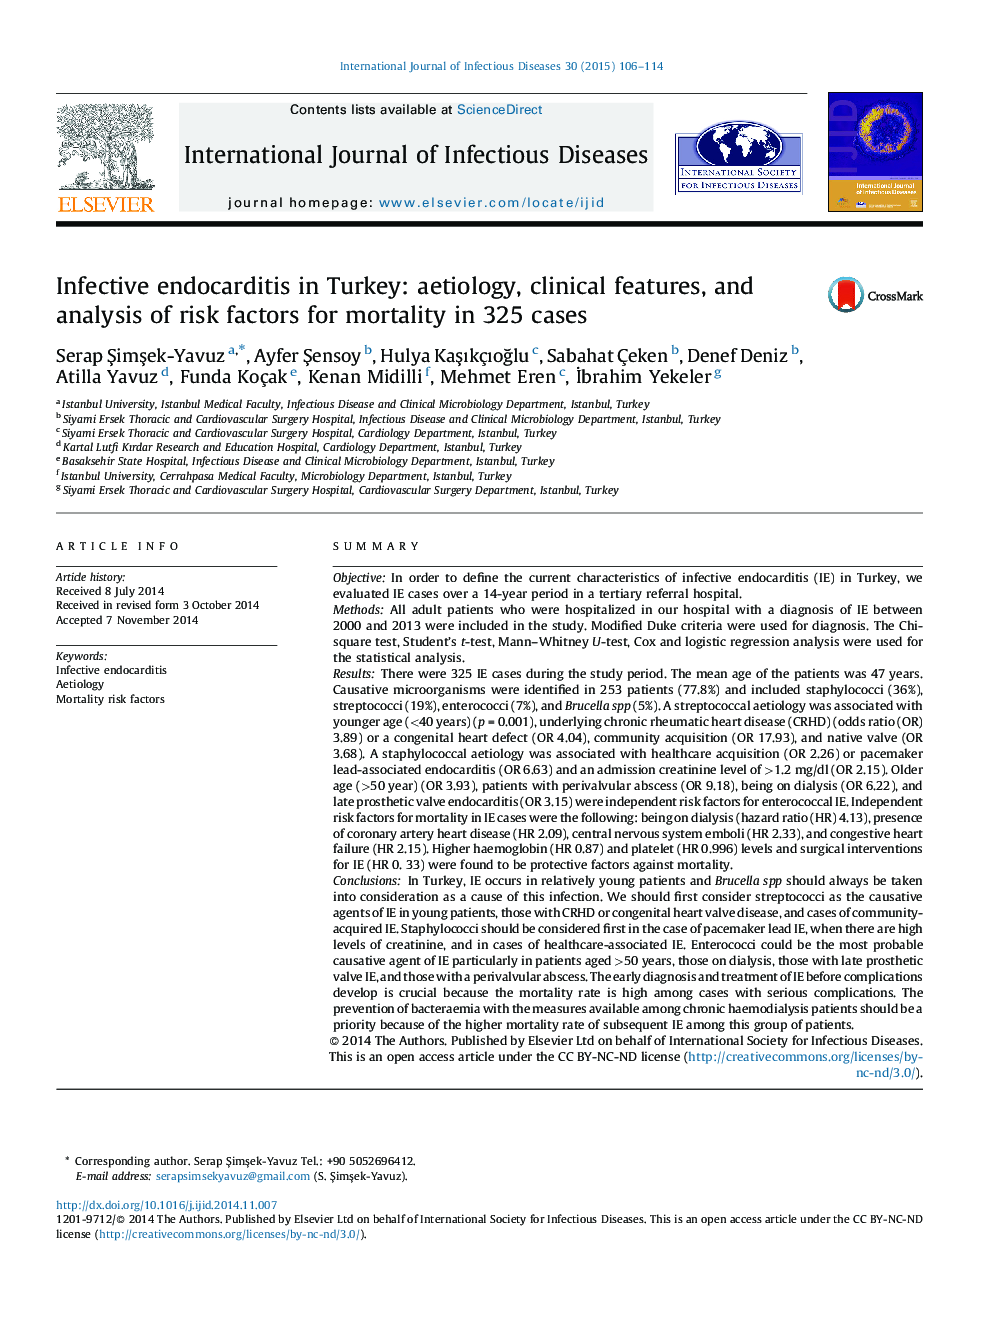 Infective endocarditis in Turkey: aetiology, clinical features, and analysis of risk factors for mortality in 325 cases